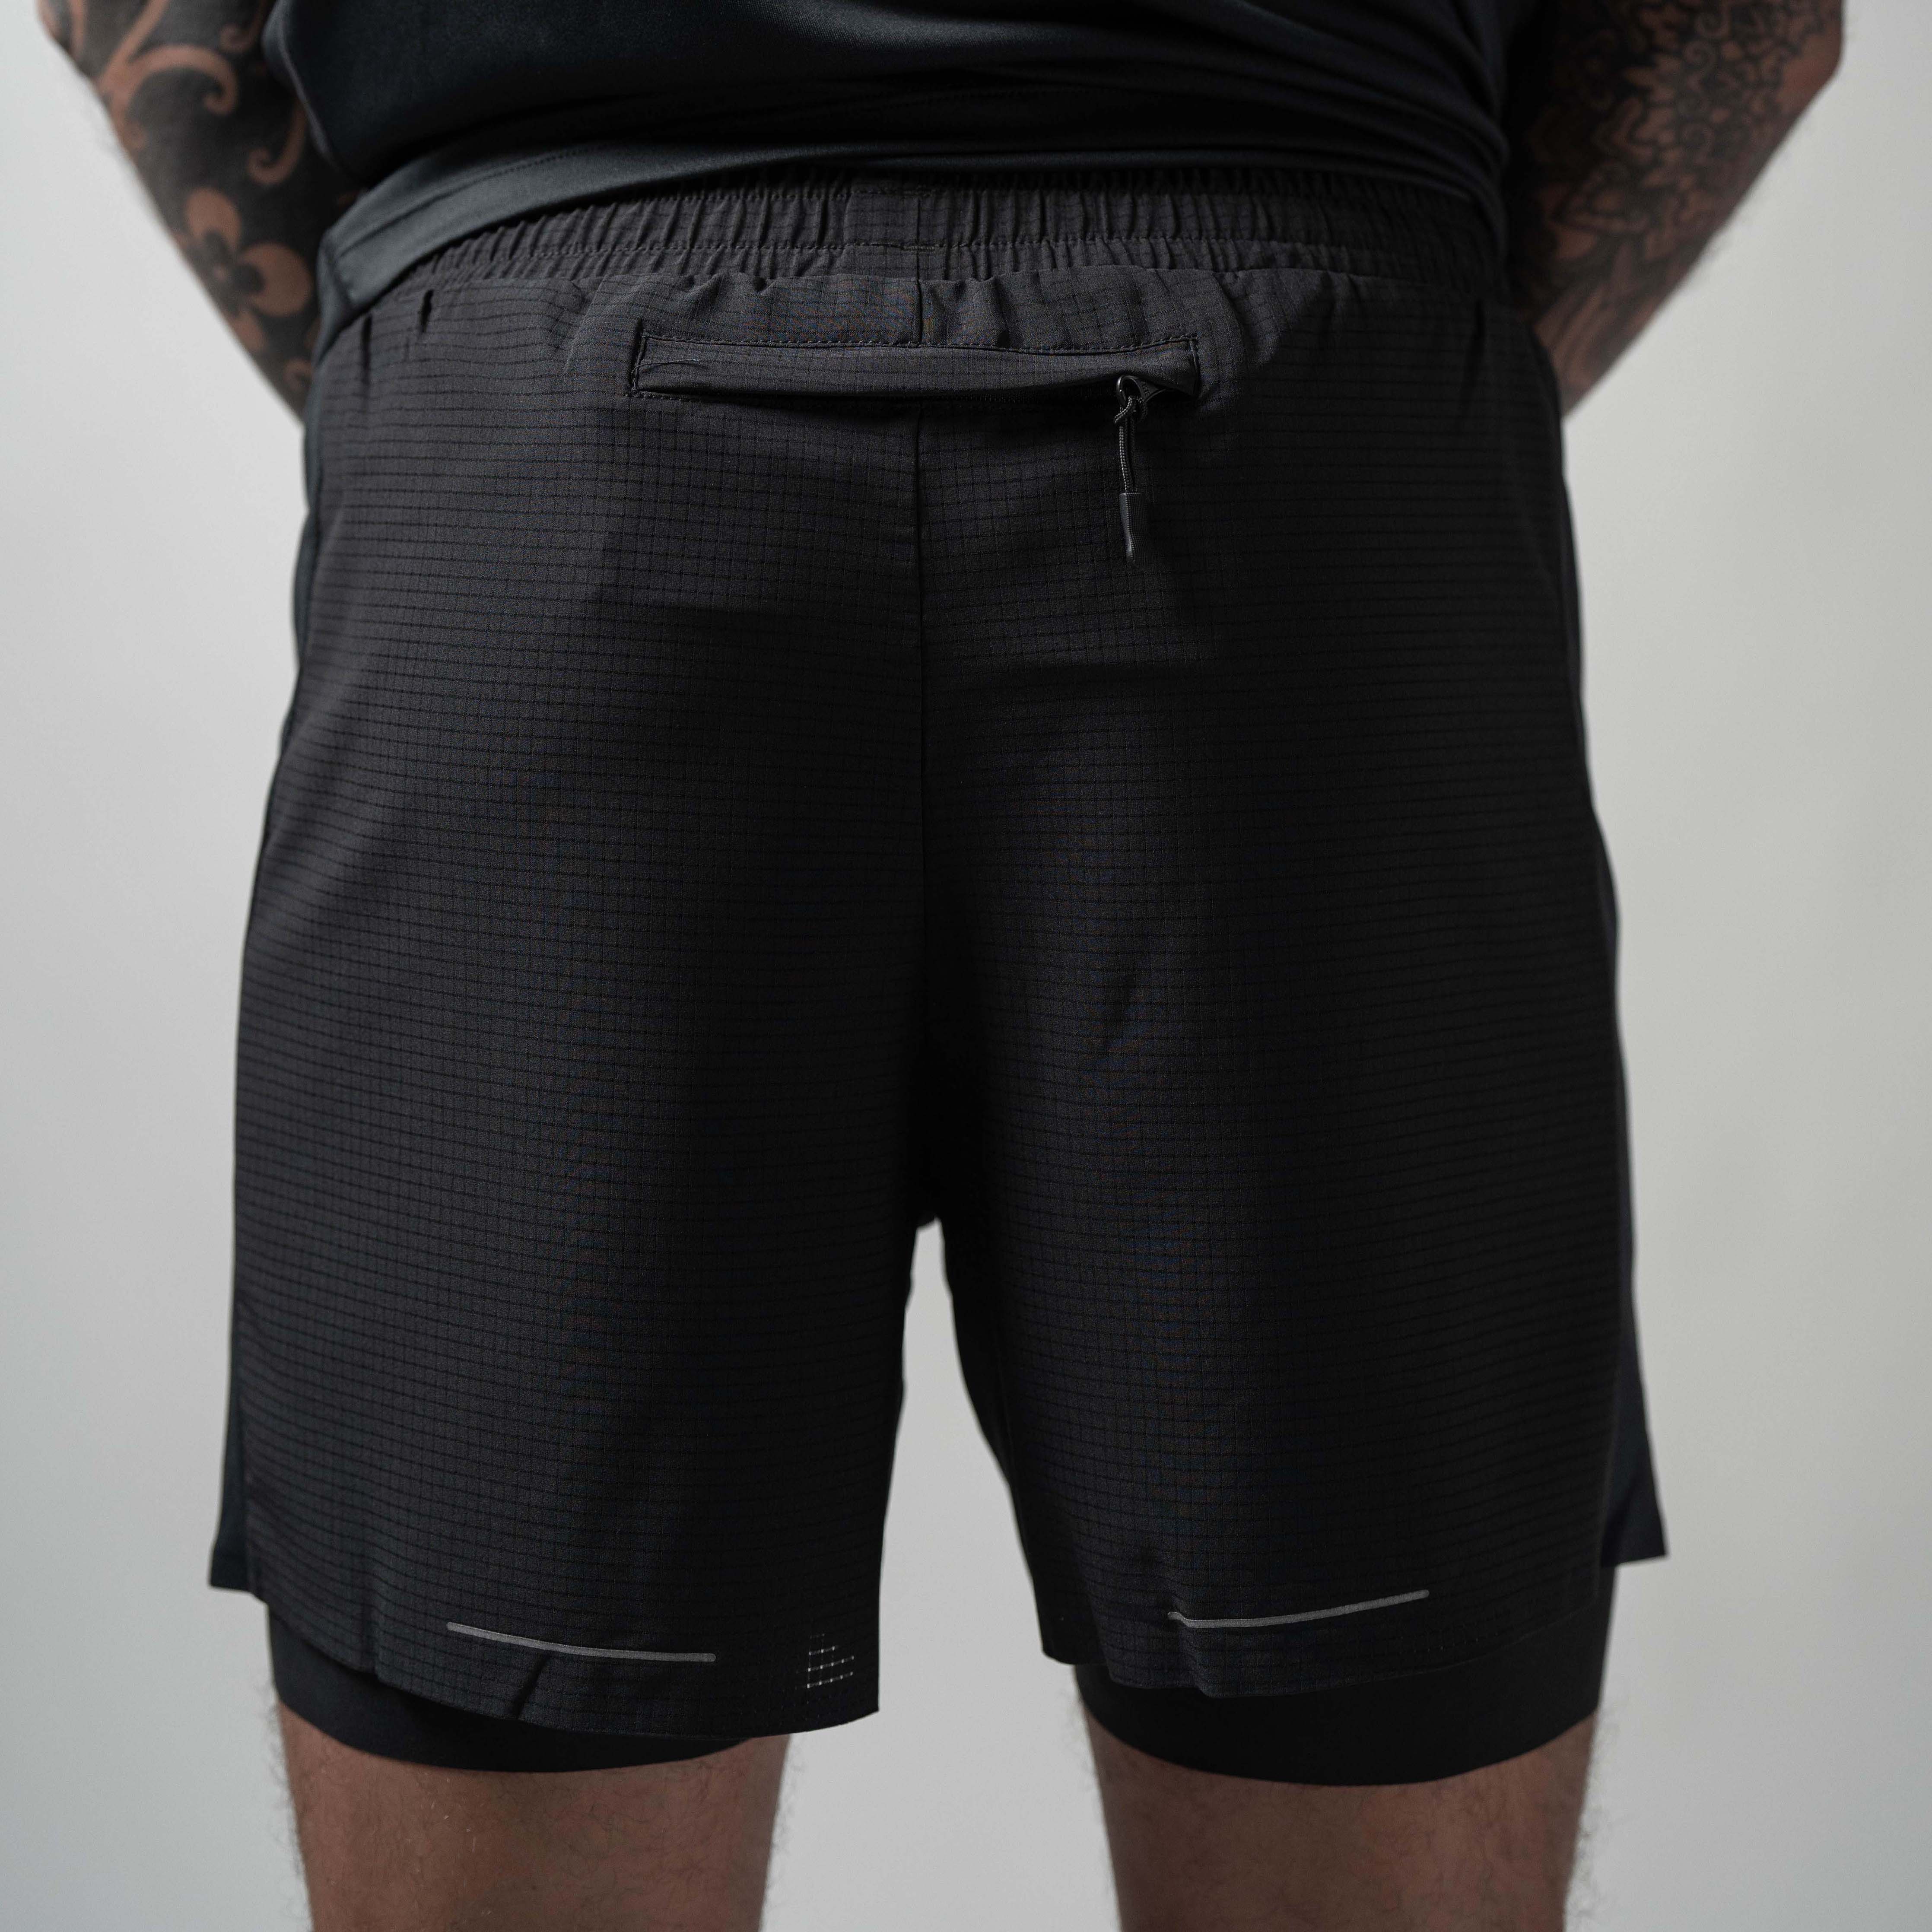 Atlas Collectif Core 2 in 1 Running Shorts - Black